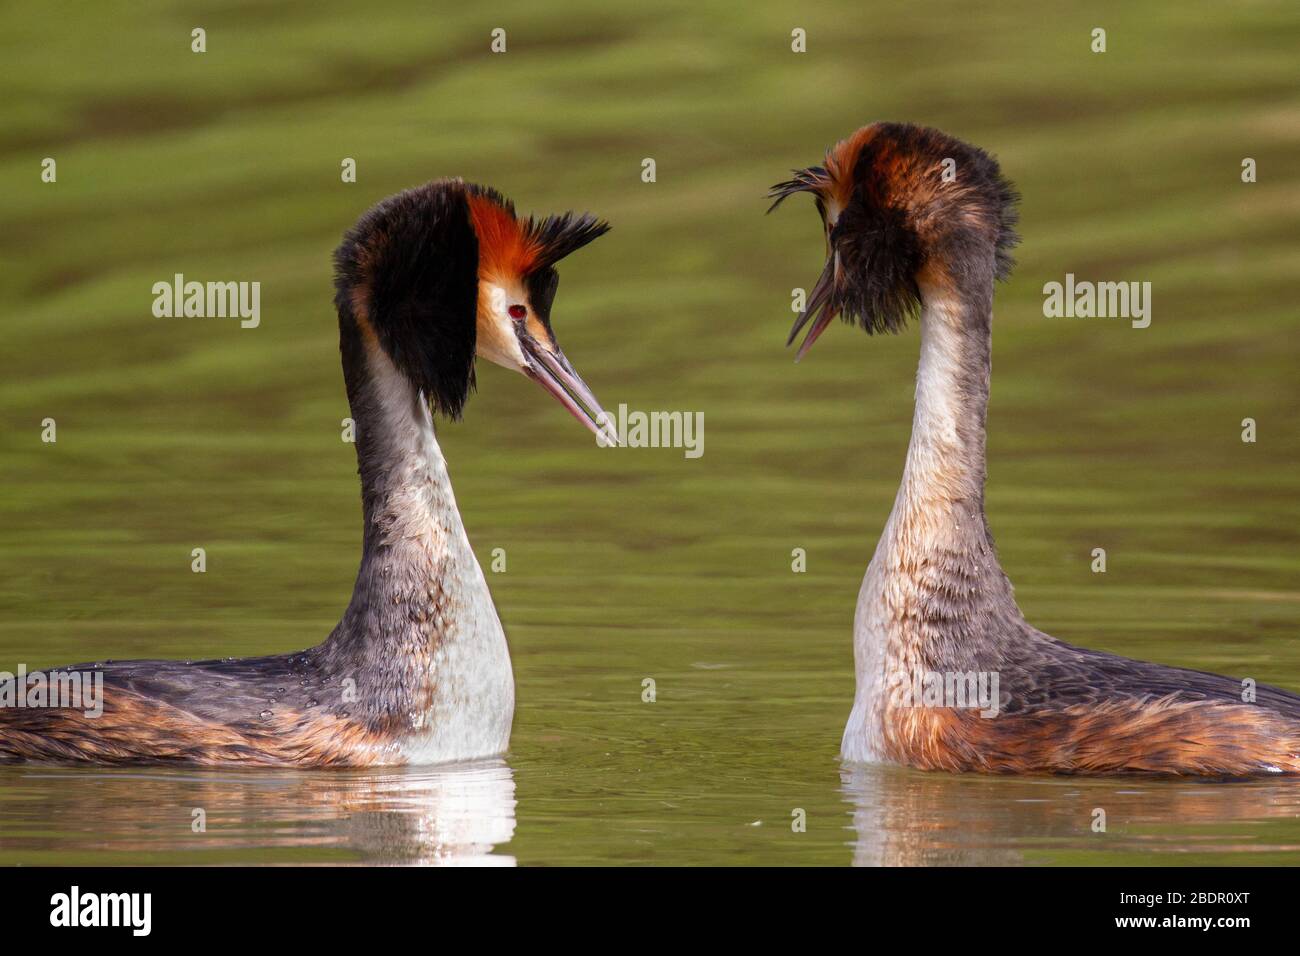 Great Crested Grebes Mating Dance Stock Photo